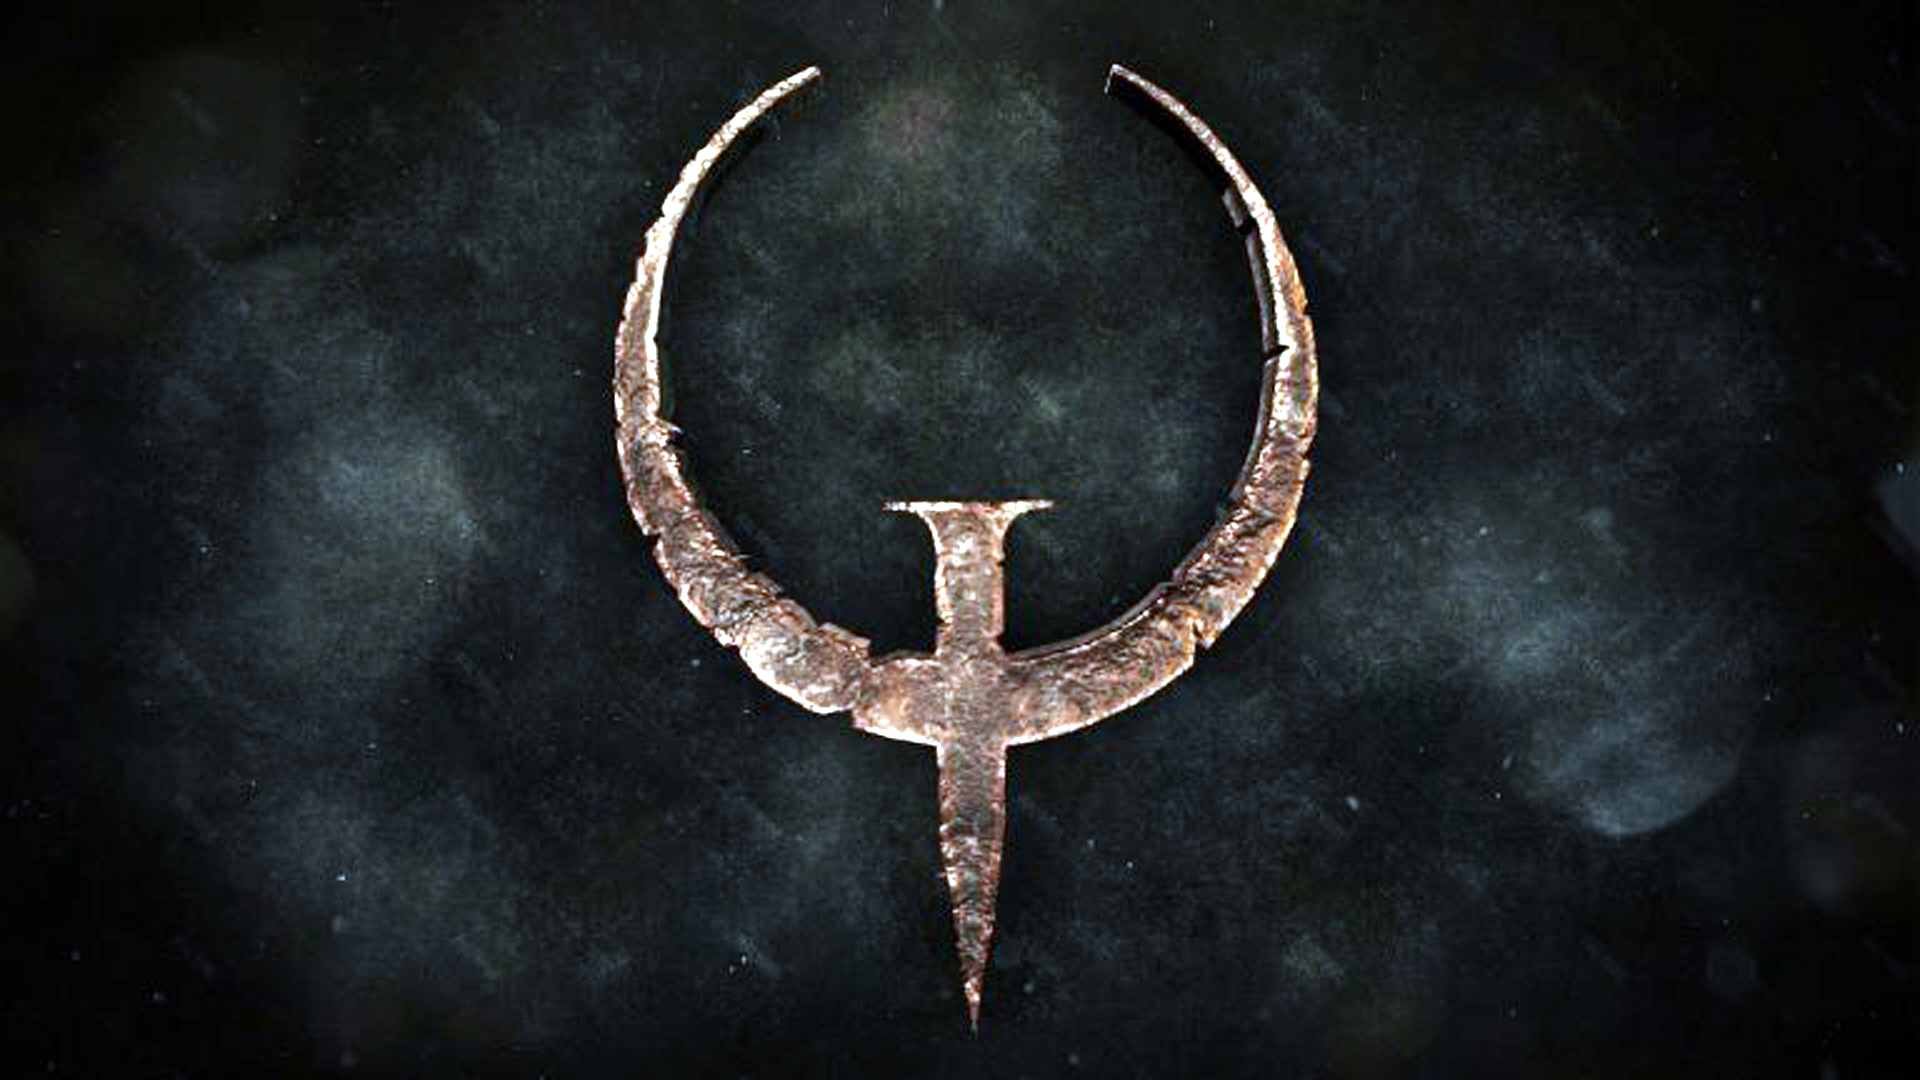 Quake remake with ‘additional content’ is coming from Wolfenstein devs